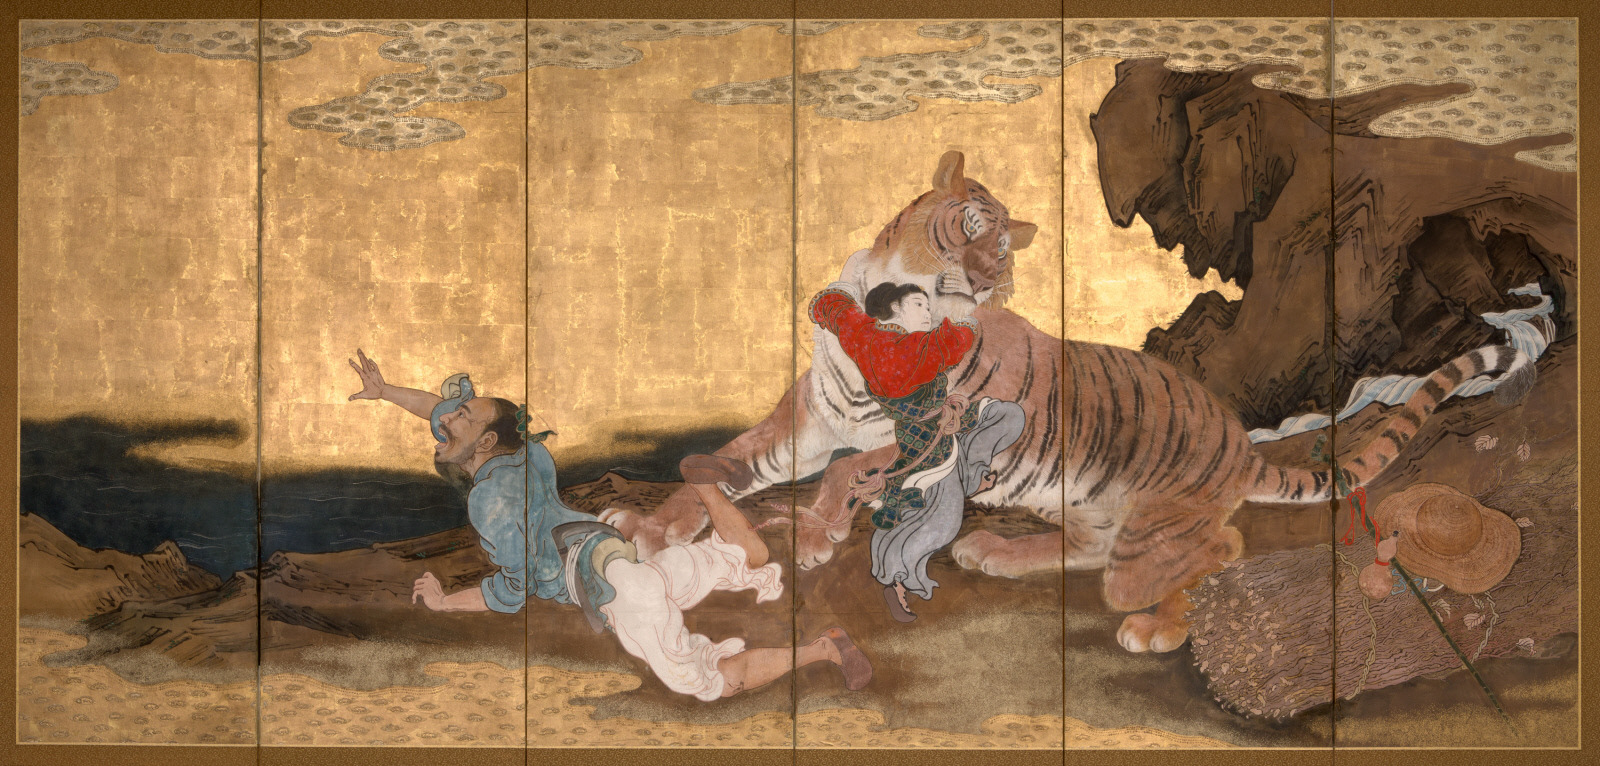 Screen depicting a Tiger. Japanese, 19th century. Ink, mineral pigments, and gold on silk. 71 3/8 x 140 x 1 in. (181.3 x 355.6 x 2.5 cm). Gift of Lenora and Walter F Brown, 2013.38.263.b.